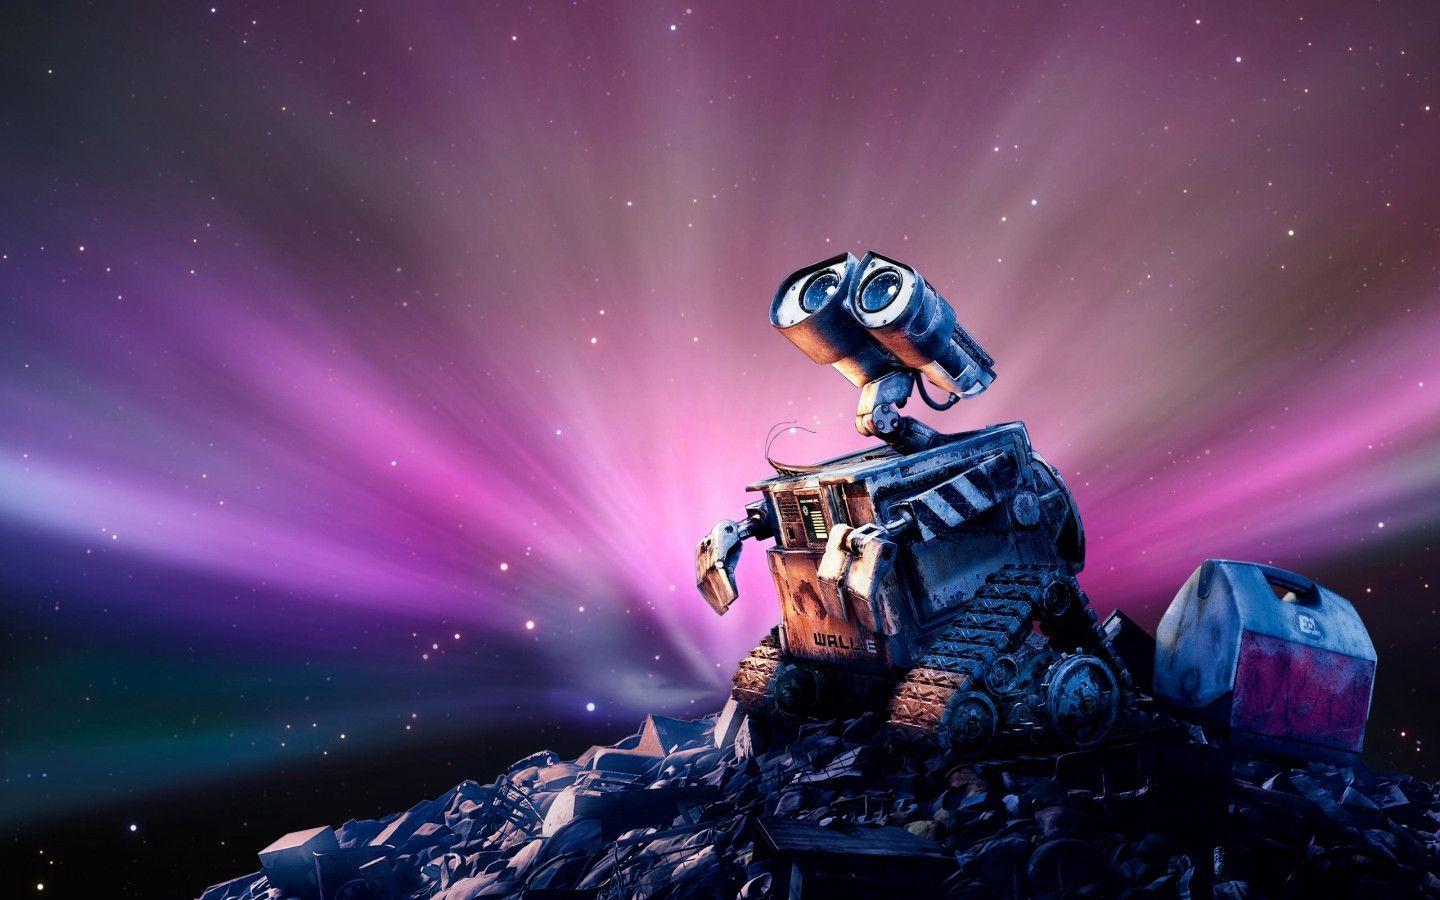 Wall-e get the water mac os download